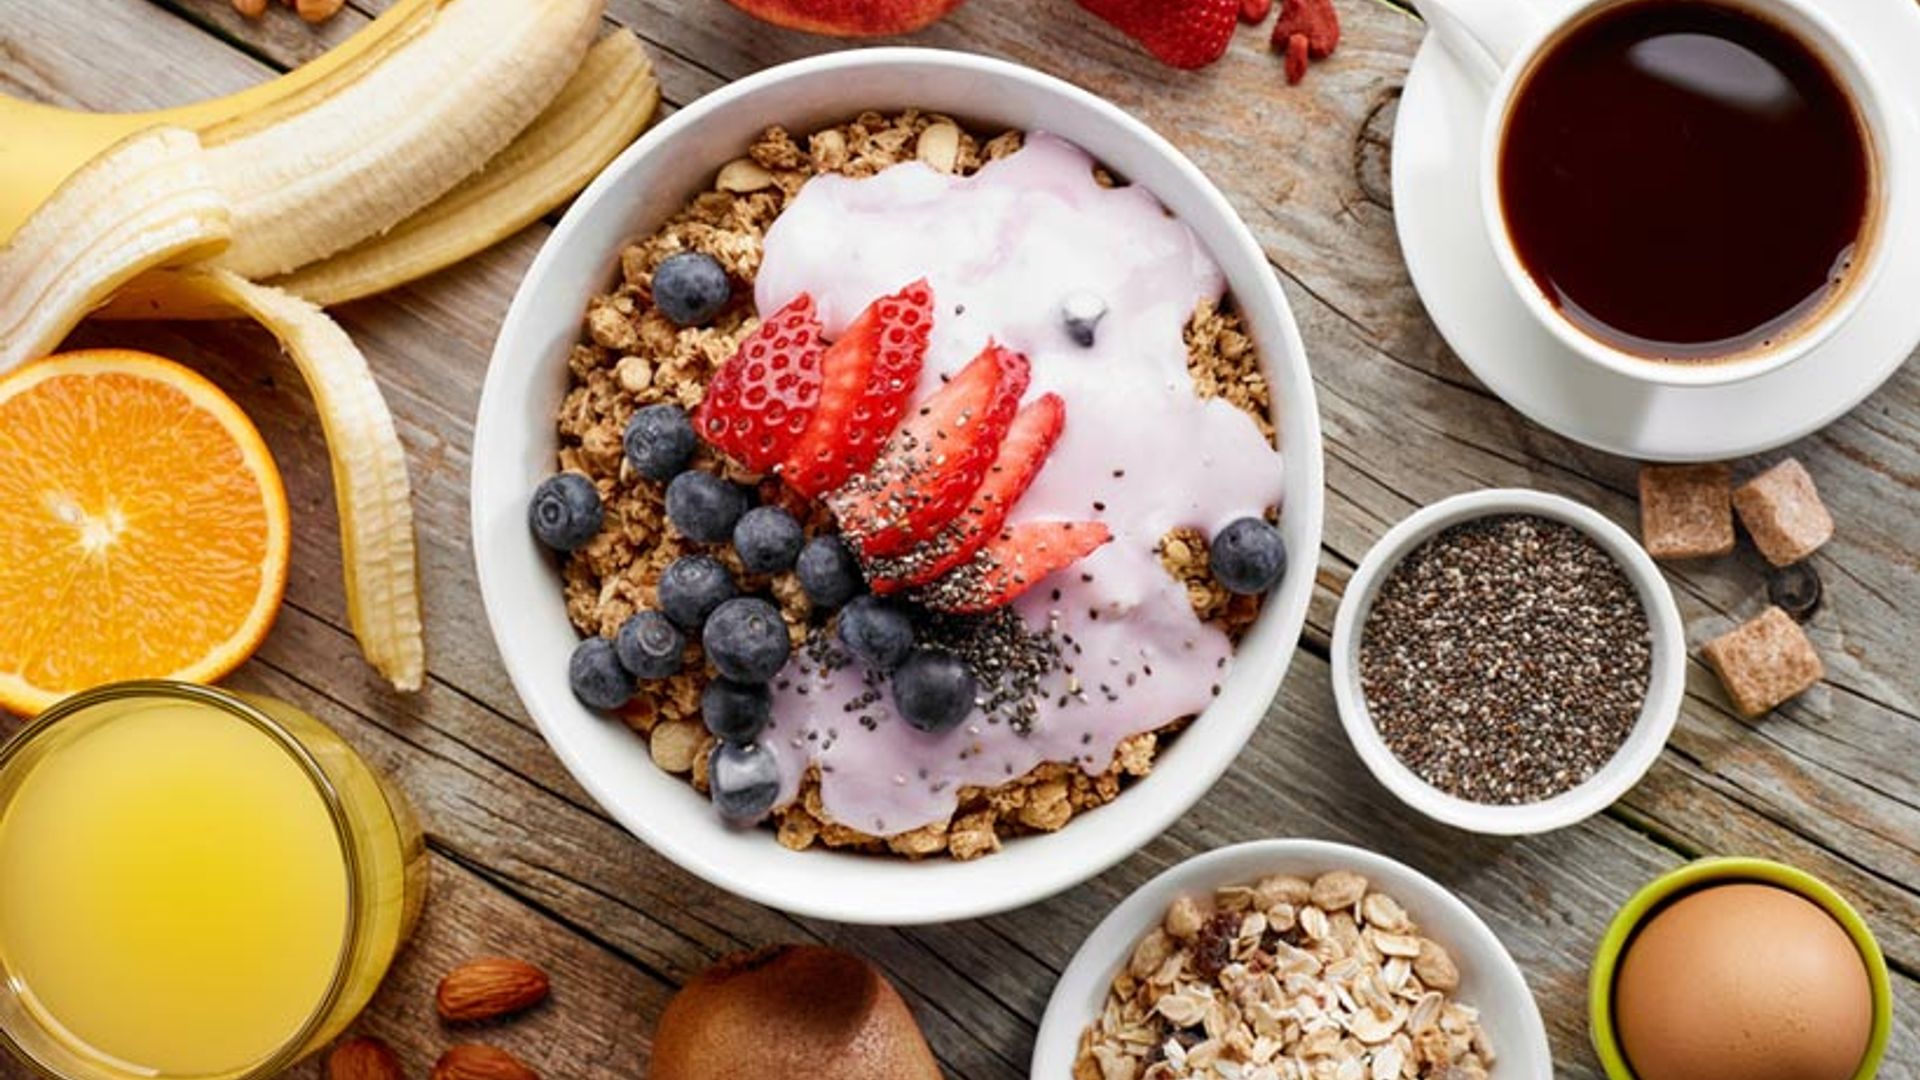 Why skipping breakfast could be harmful to your health